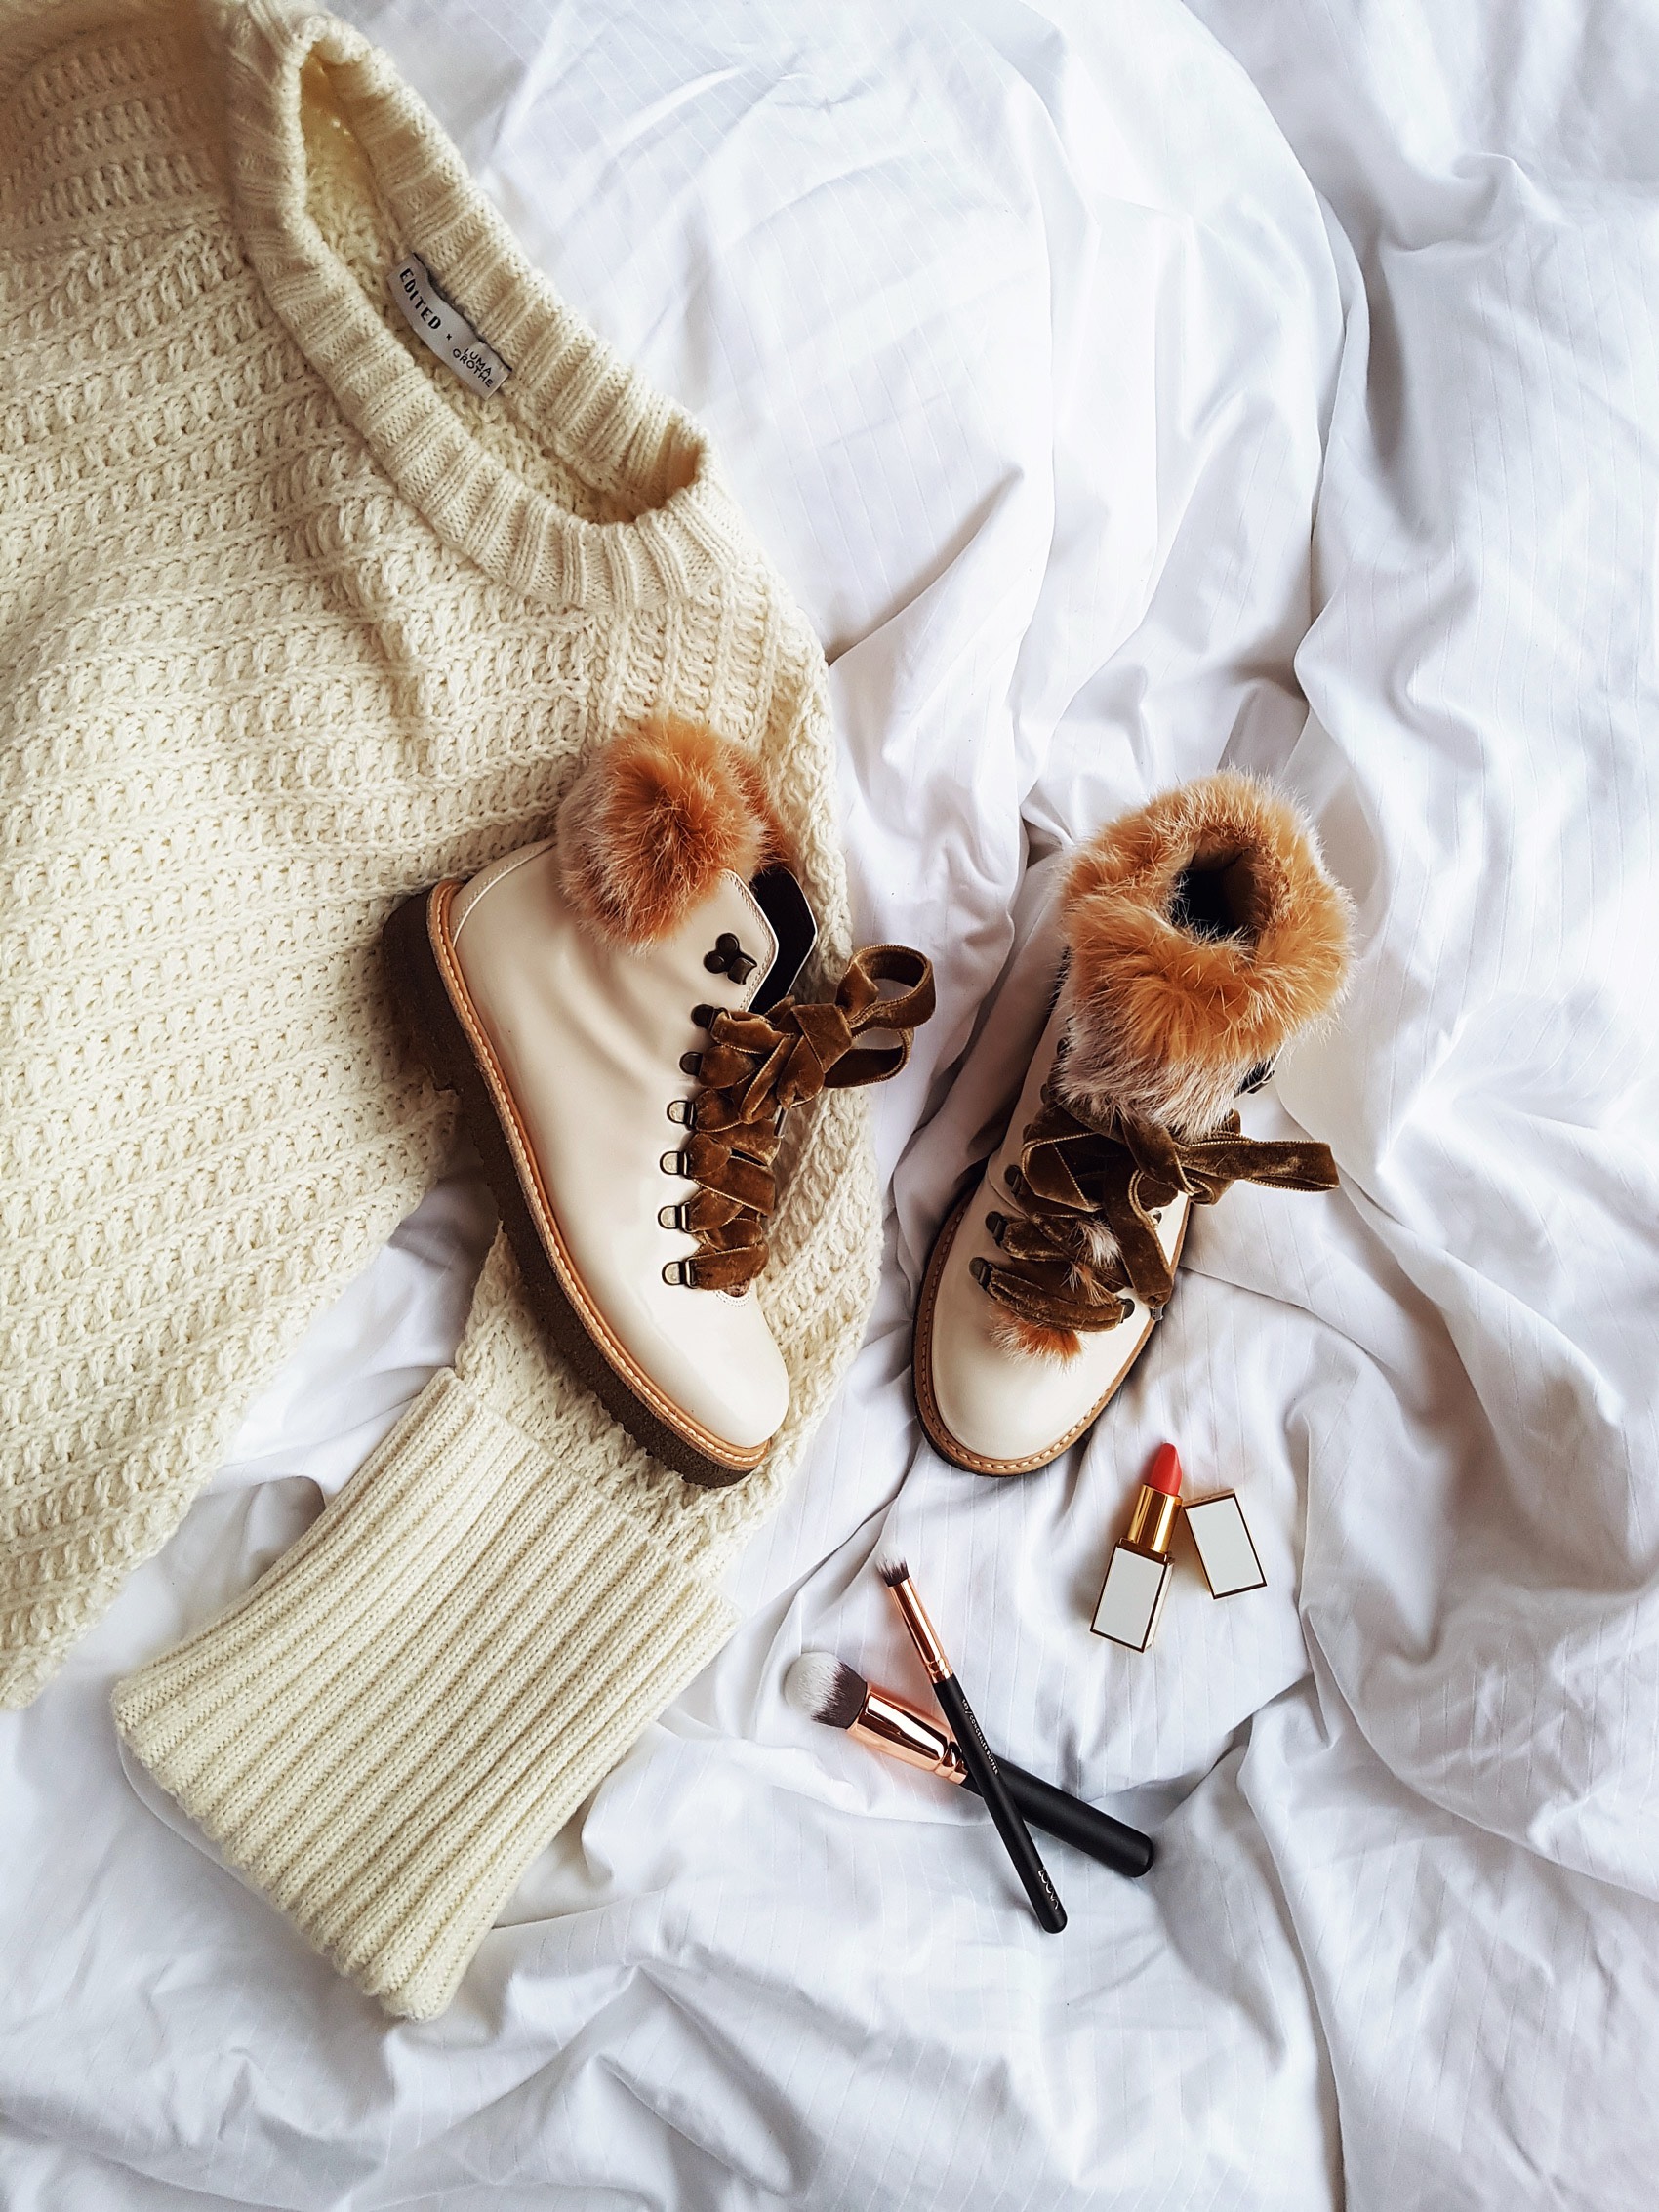 agl-fur-boots-knit-sweater-edited-the-label-pullover-zoeva-pinsel-set-fashiioncarpet